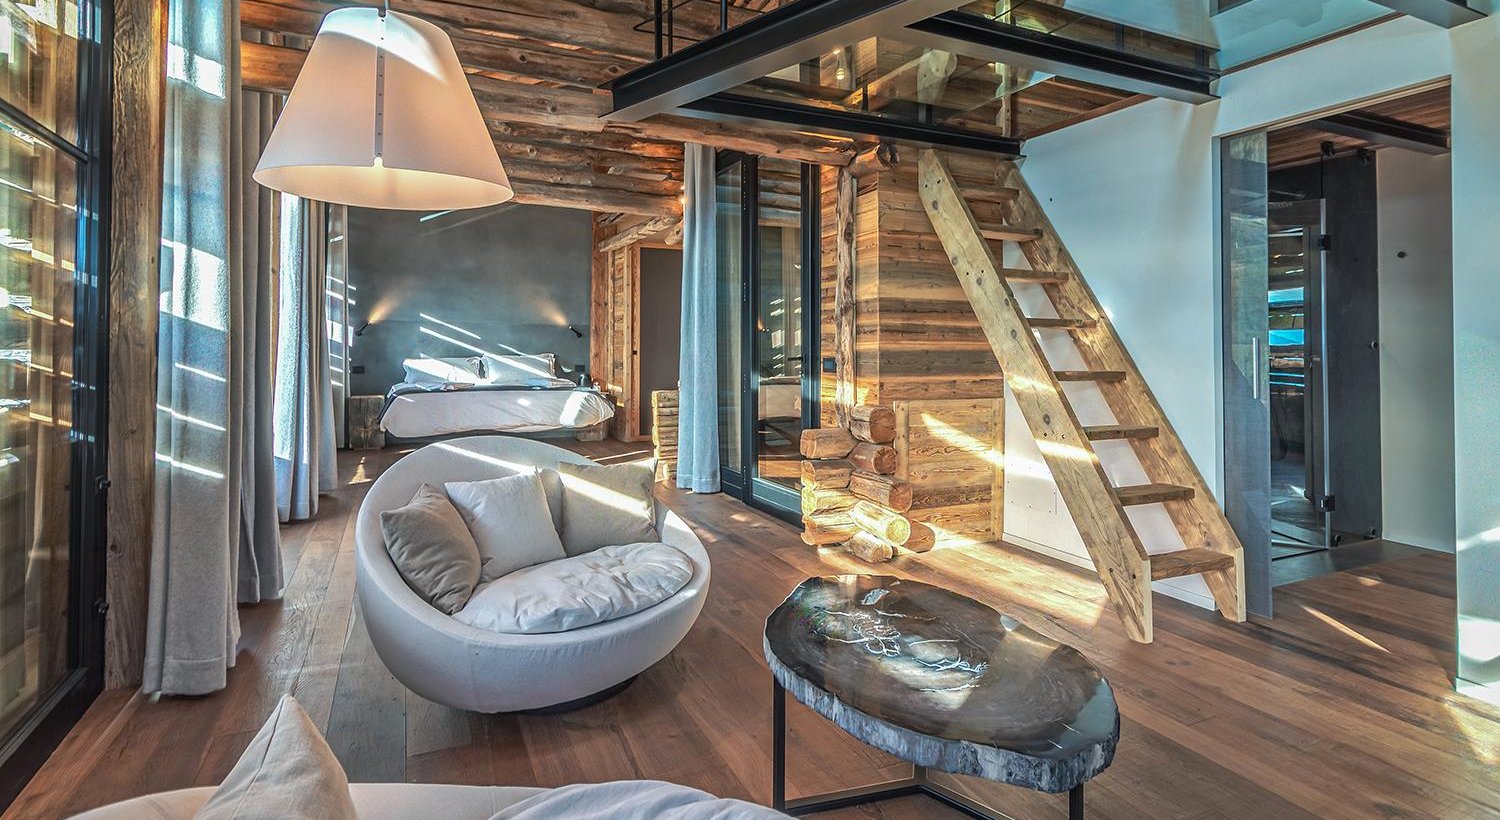 Interior of the Cocoon Deluxe Chalet